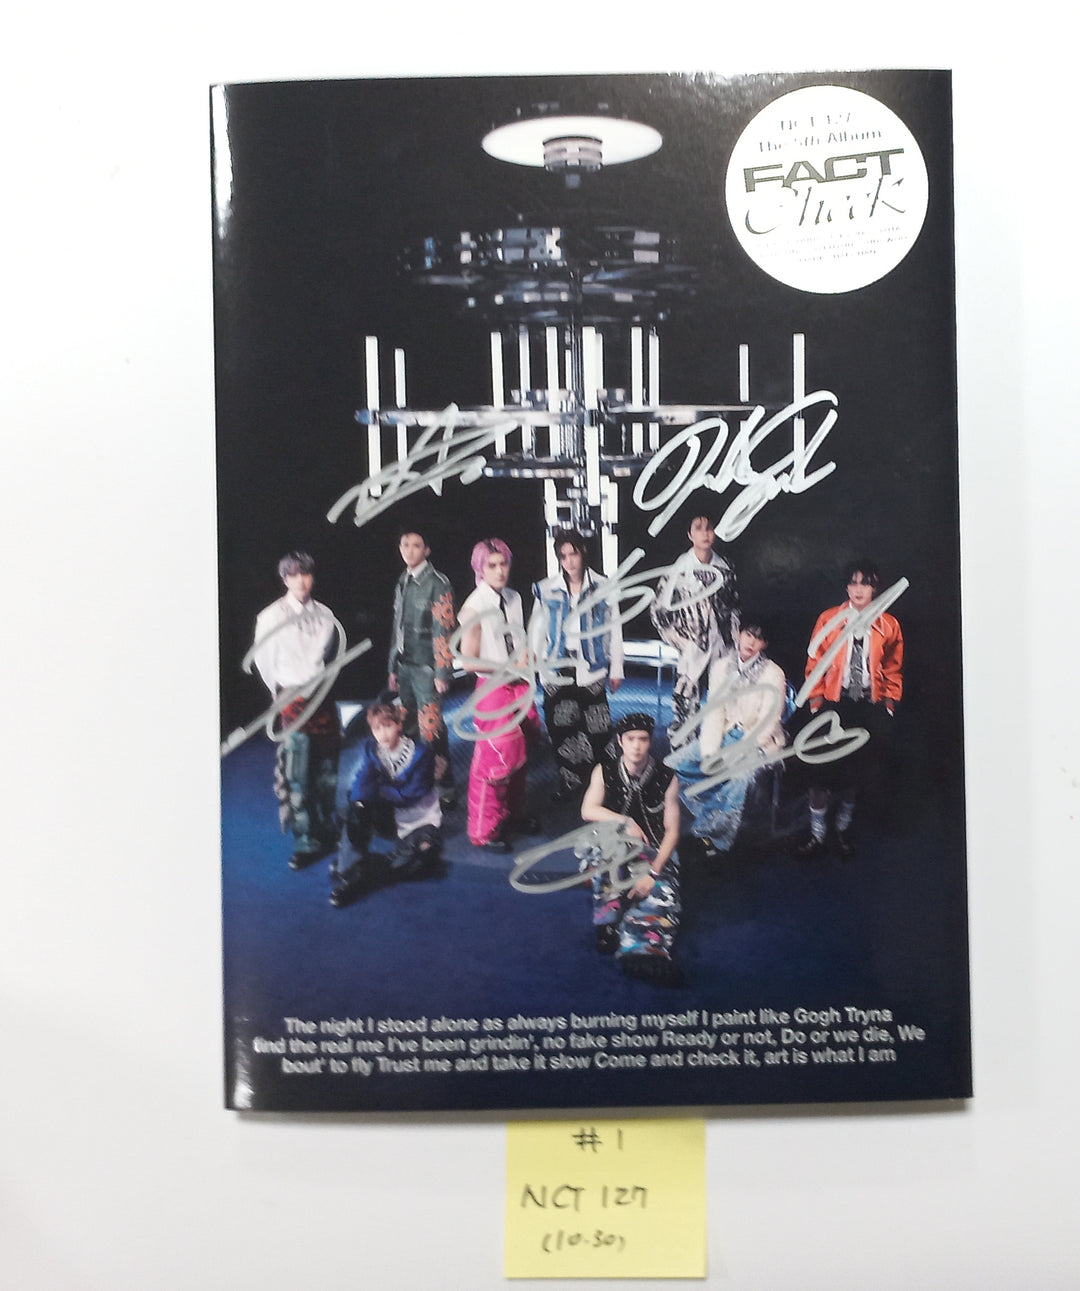 NCT 127 "Fact Check" - Hand Autographed(Signed) Promo Album - Please Read ! [23.10.30]